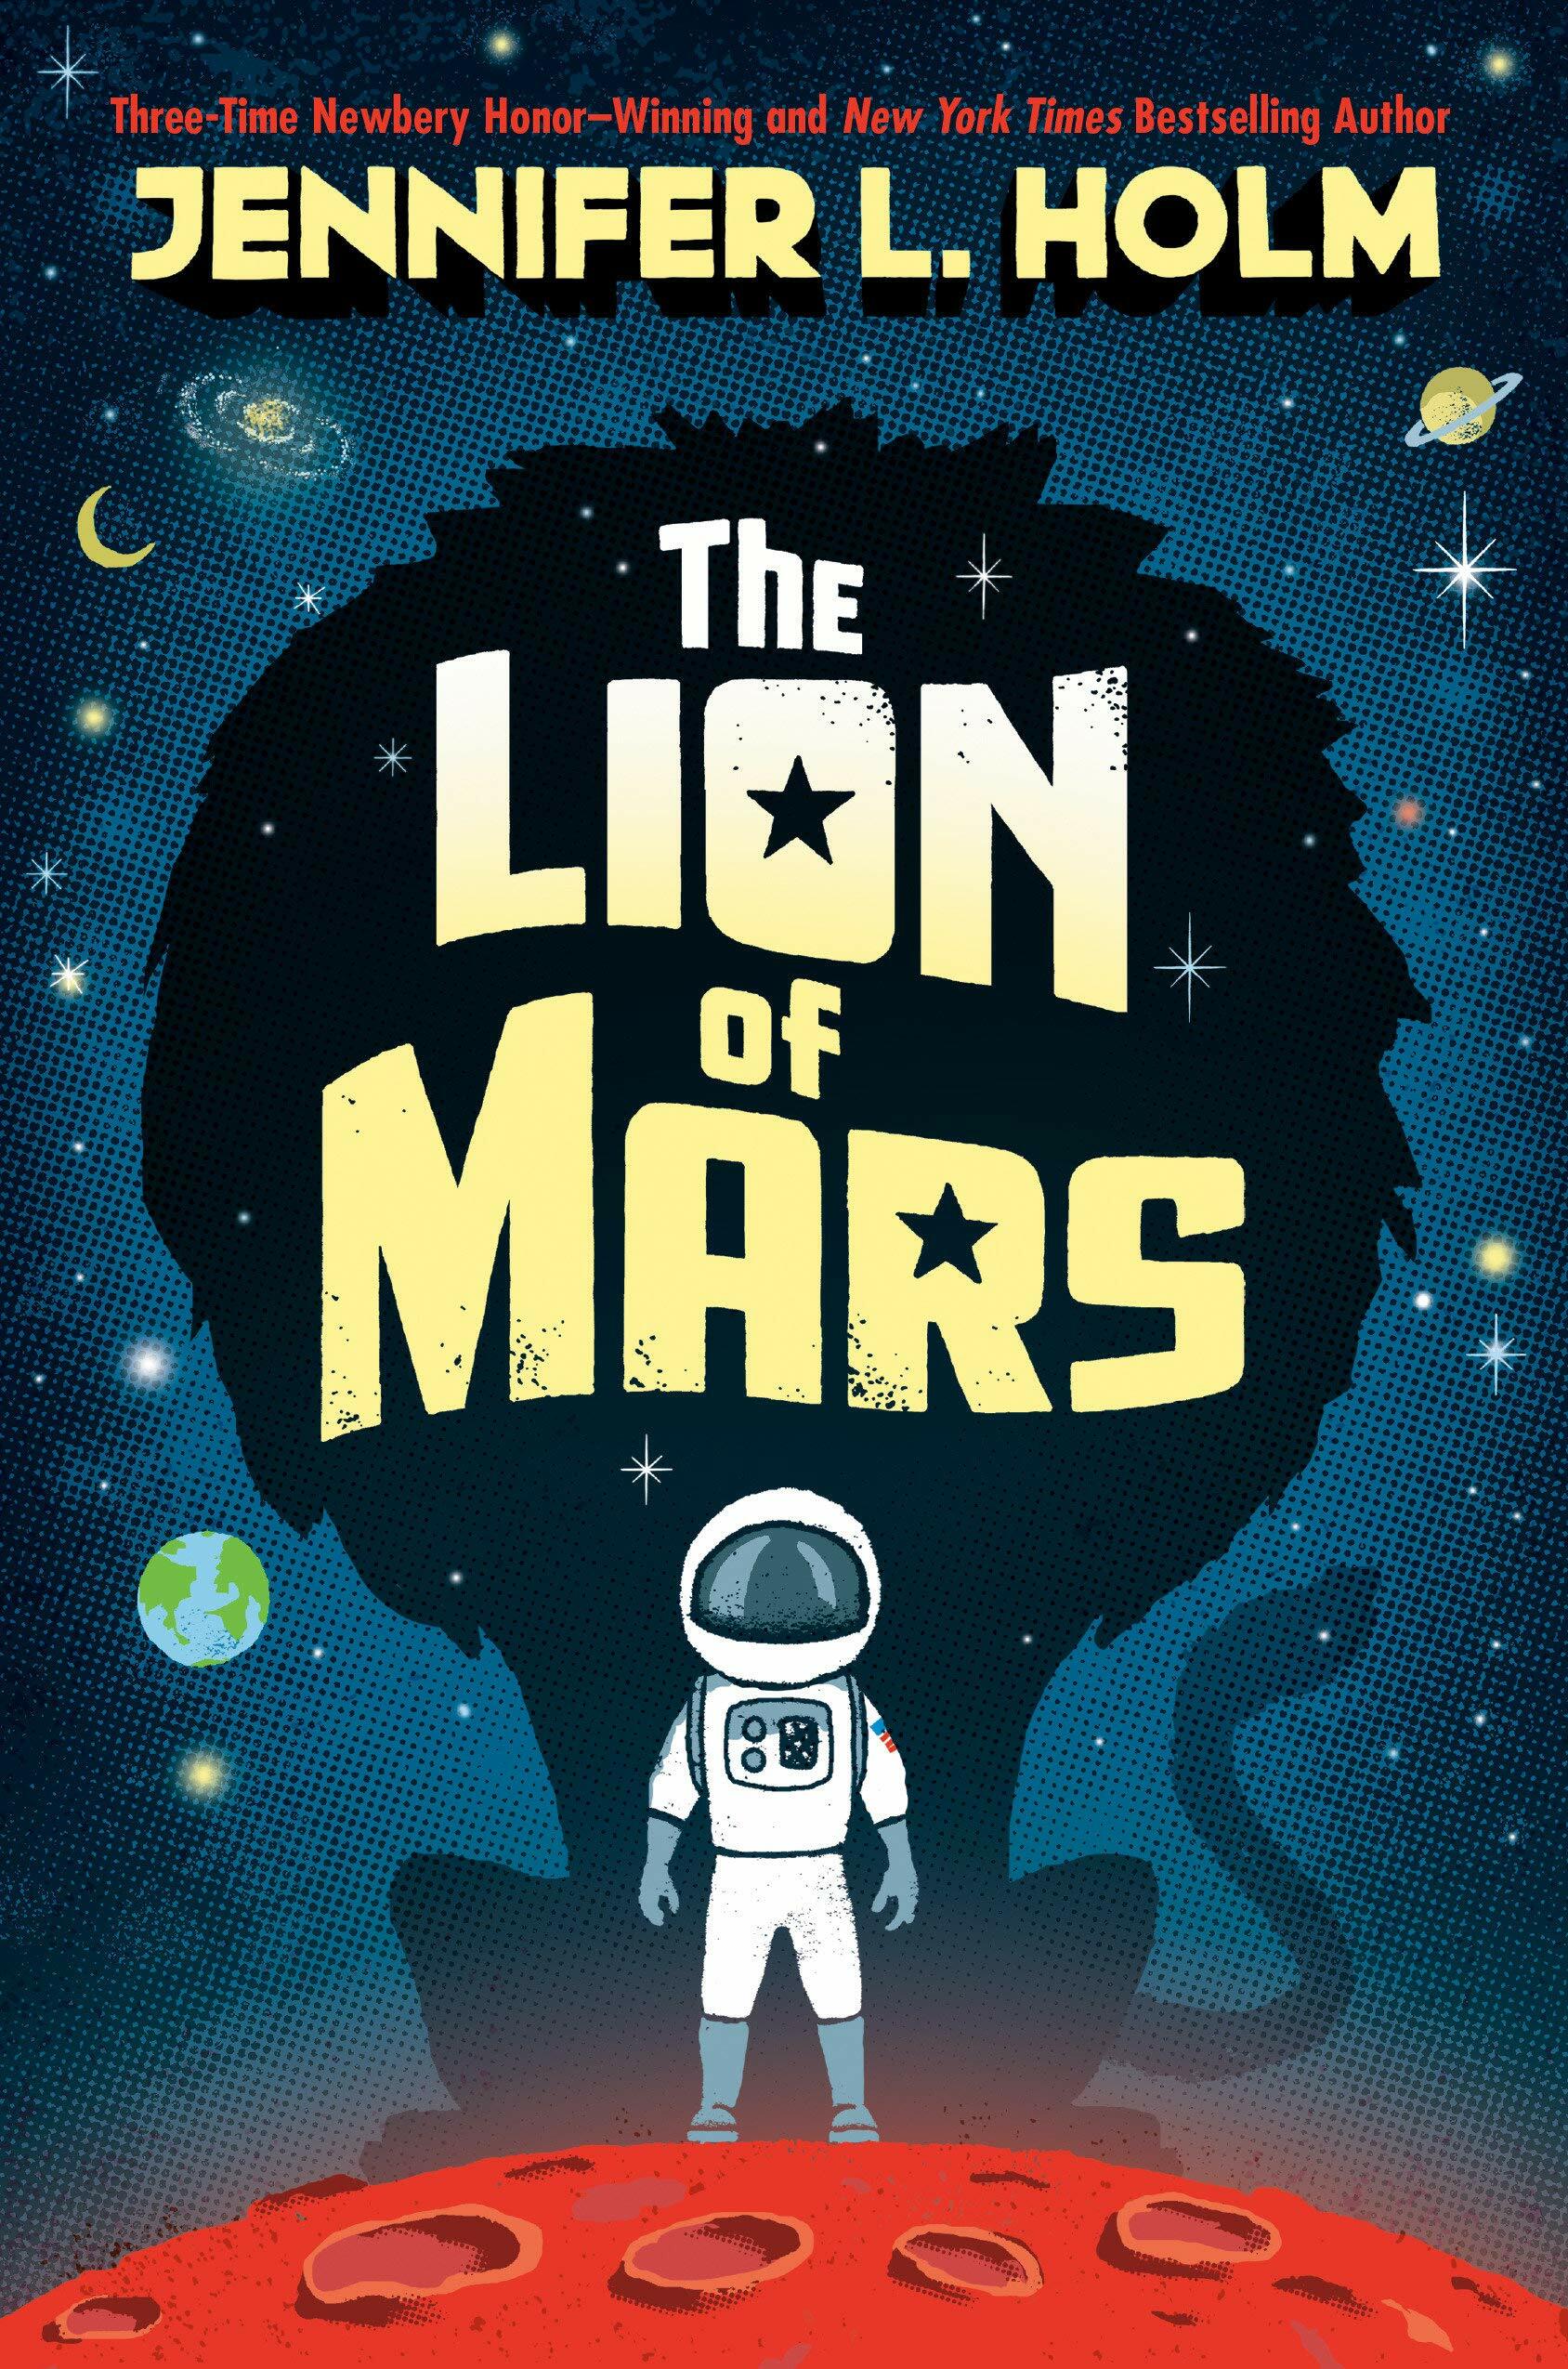 The Lion of Mars (Paperback)